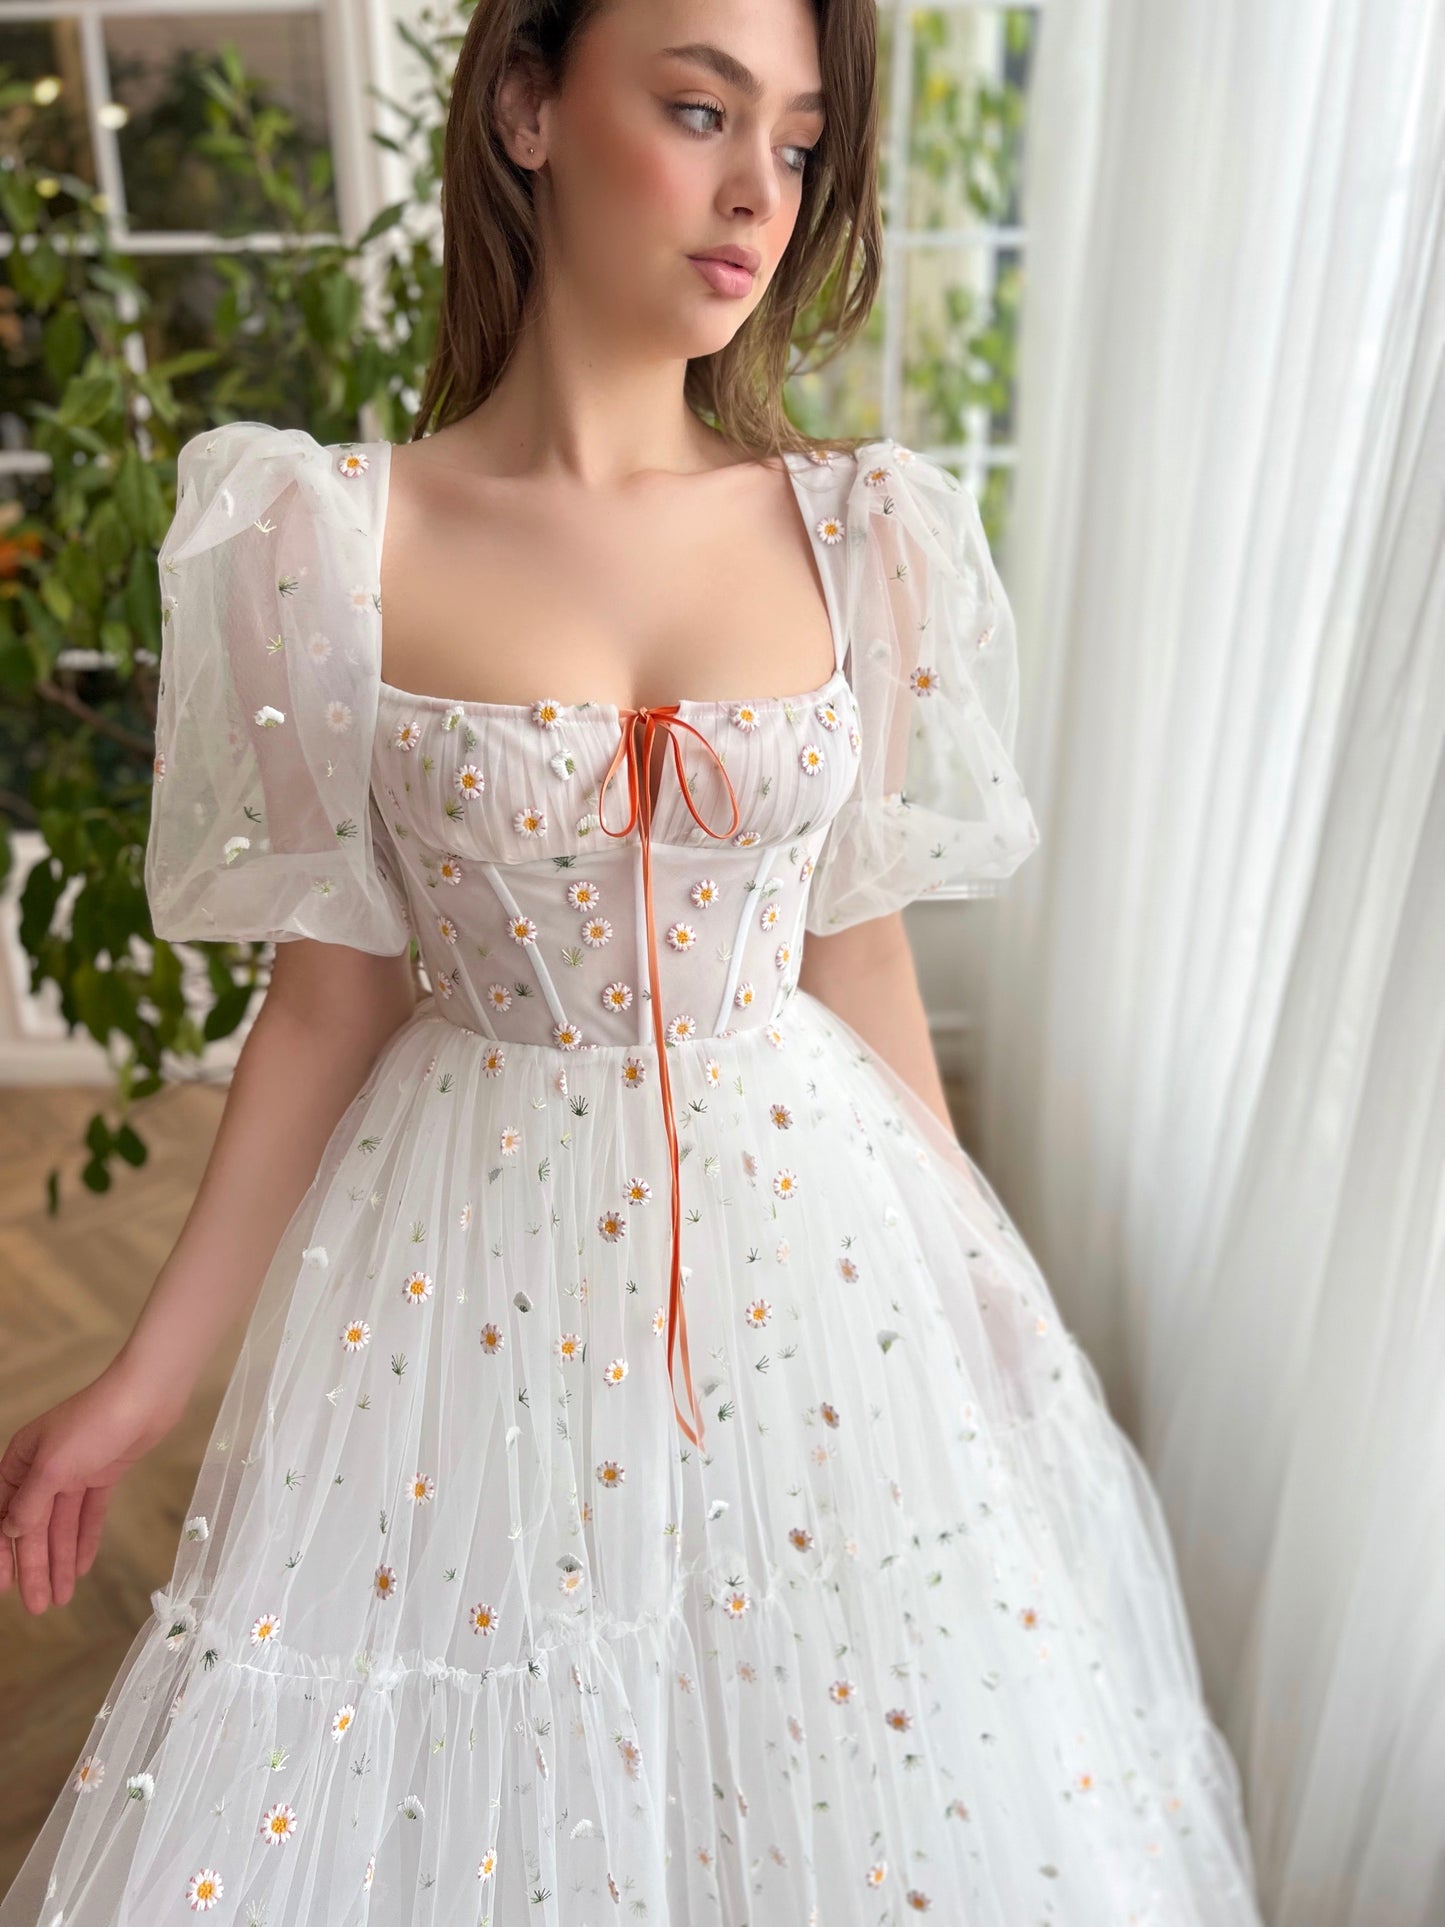 White A-Line bridal dress with short sleeves and embroidered daisies